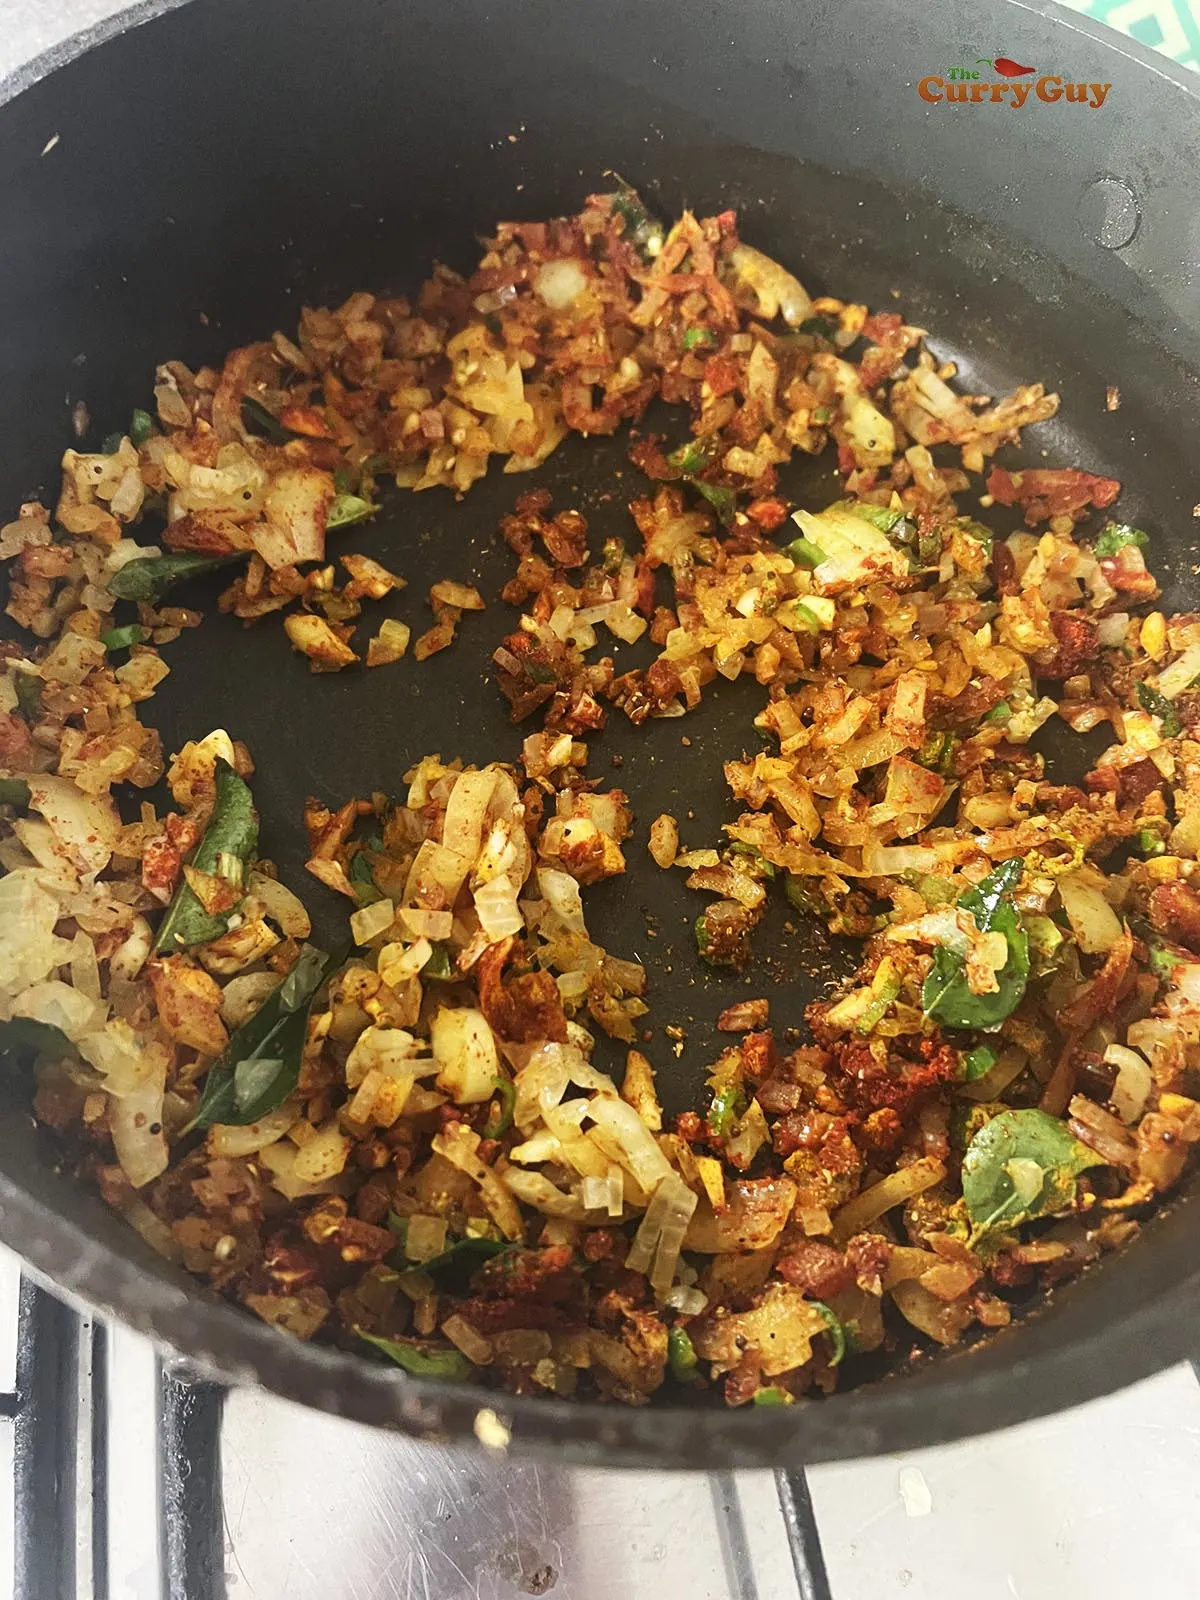 Frying onions, chillies and ground spices in a pan.